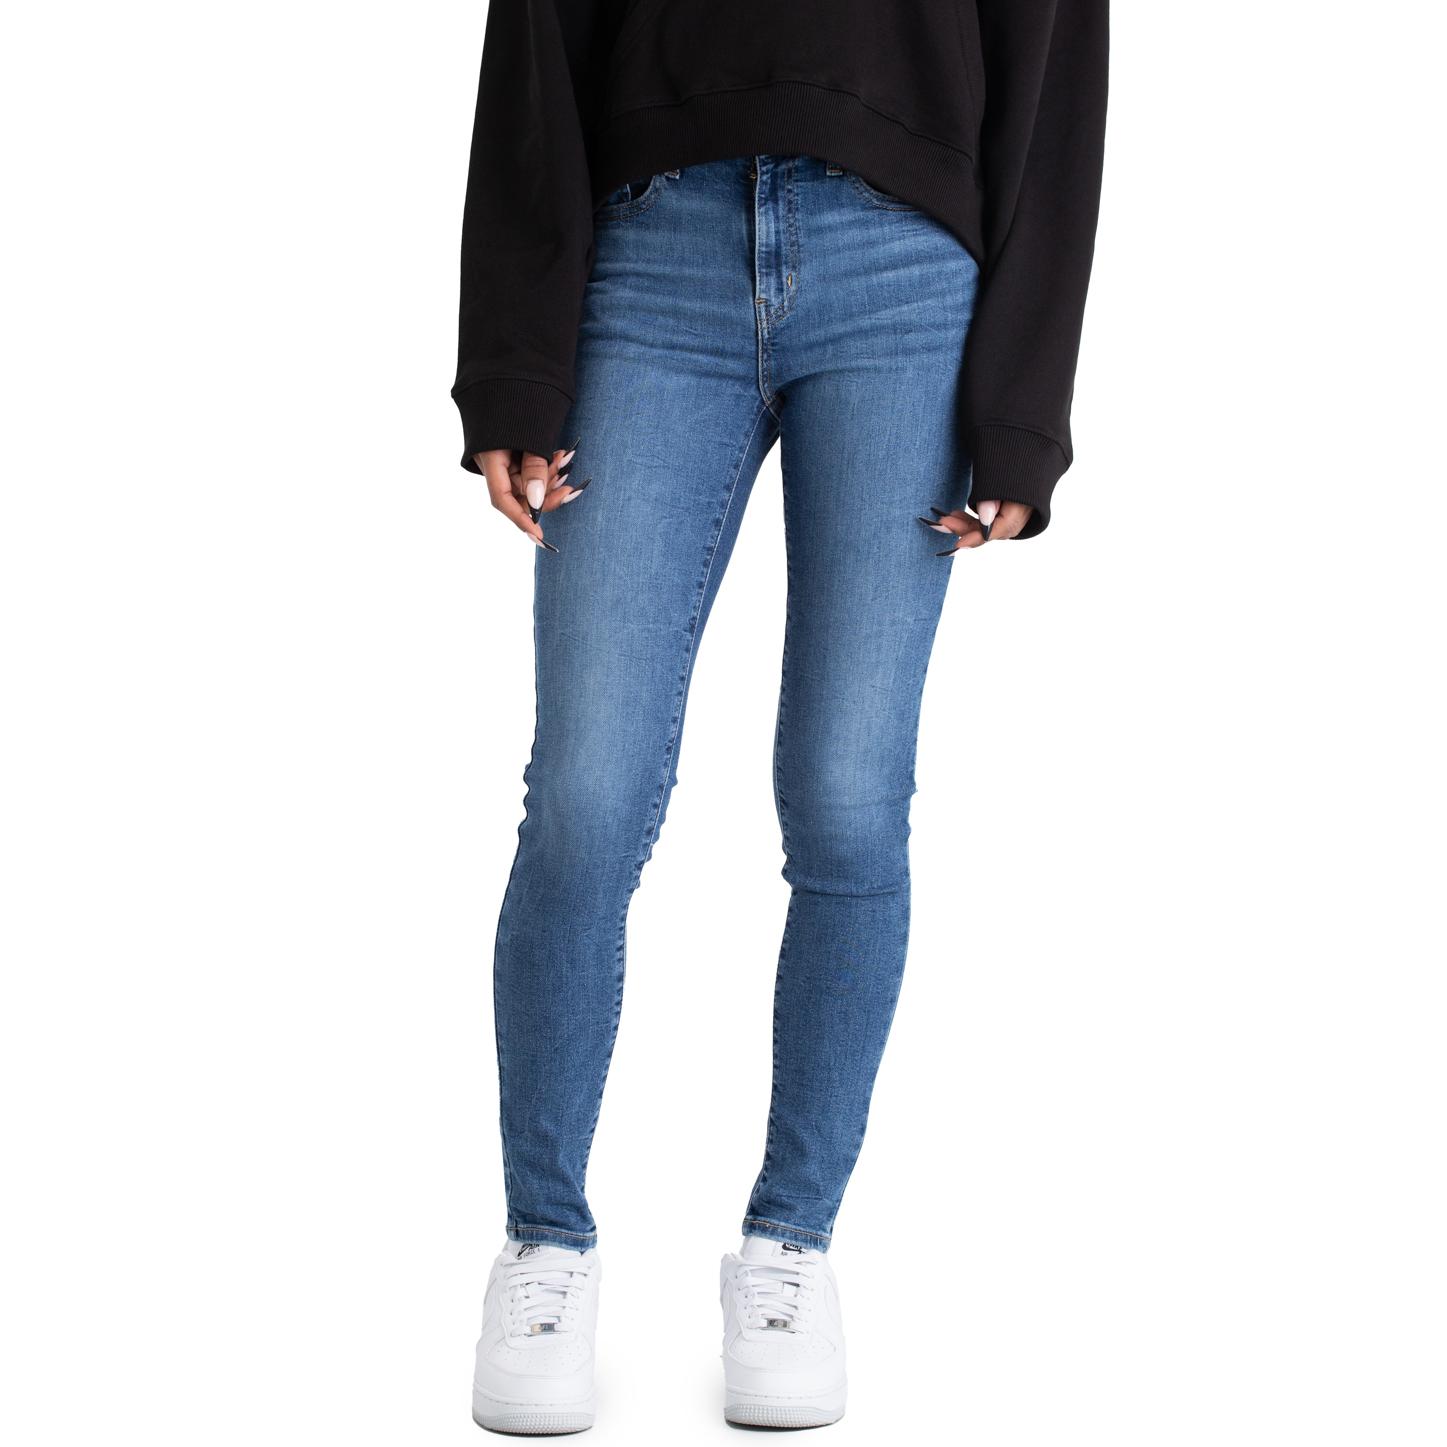 Levis Women's 720 High-Rise Super Skinny Jeans